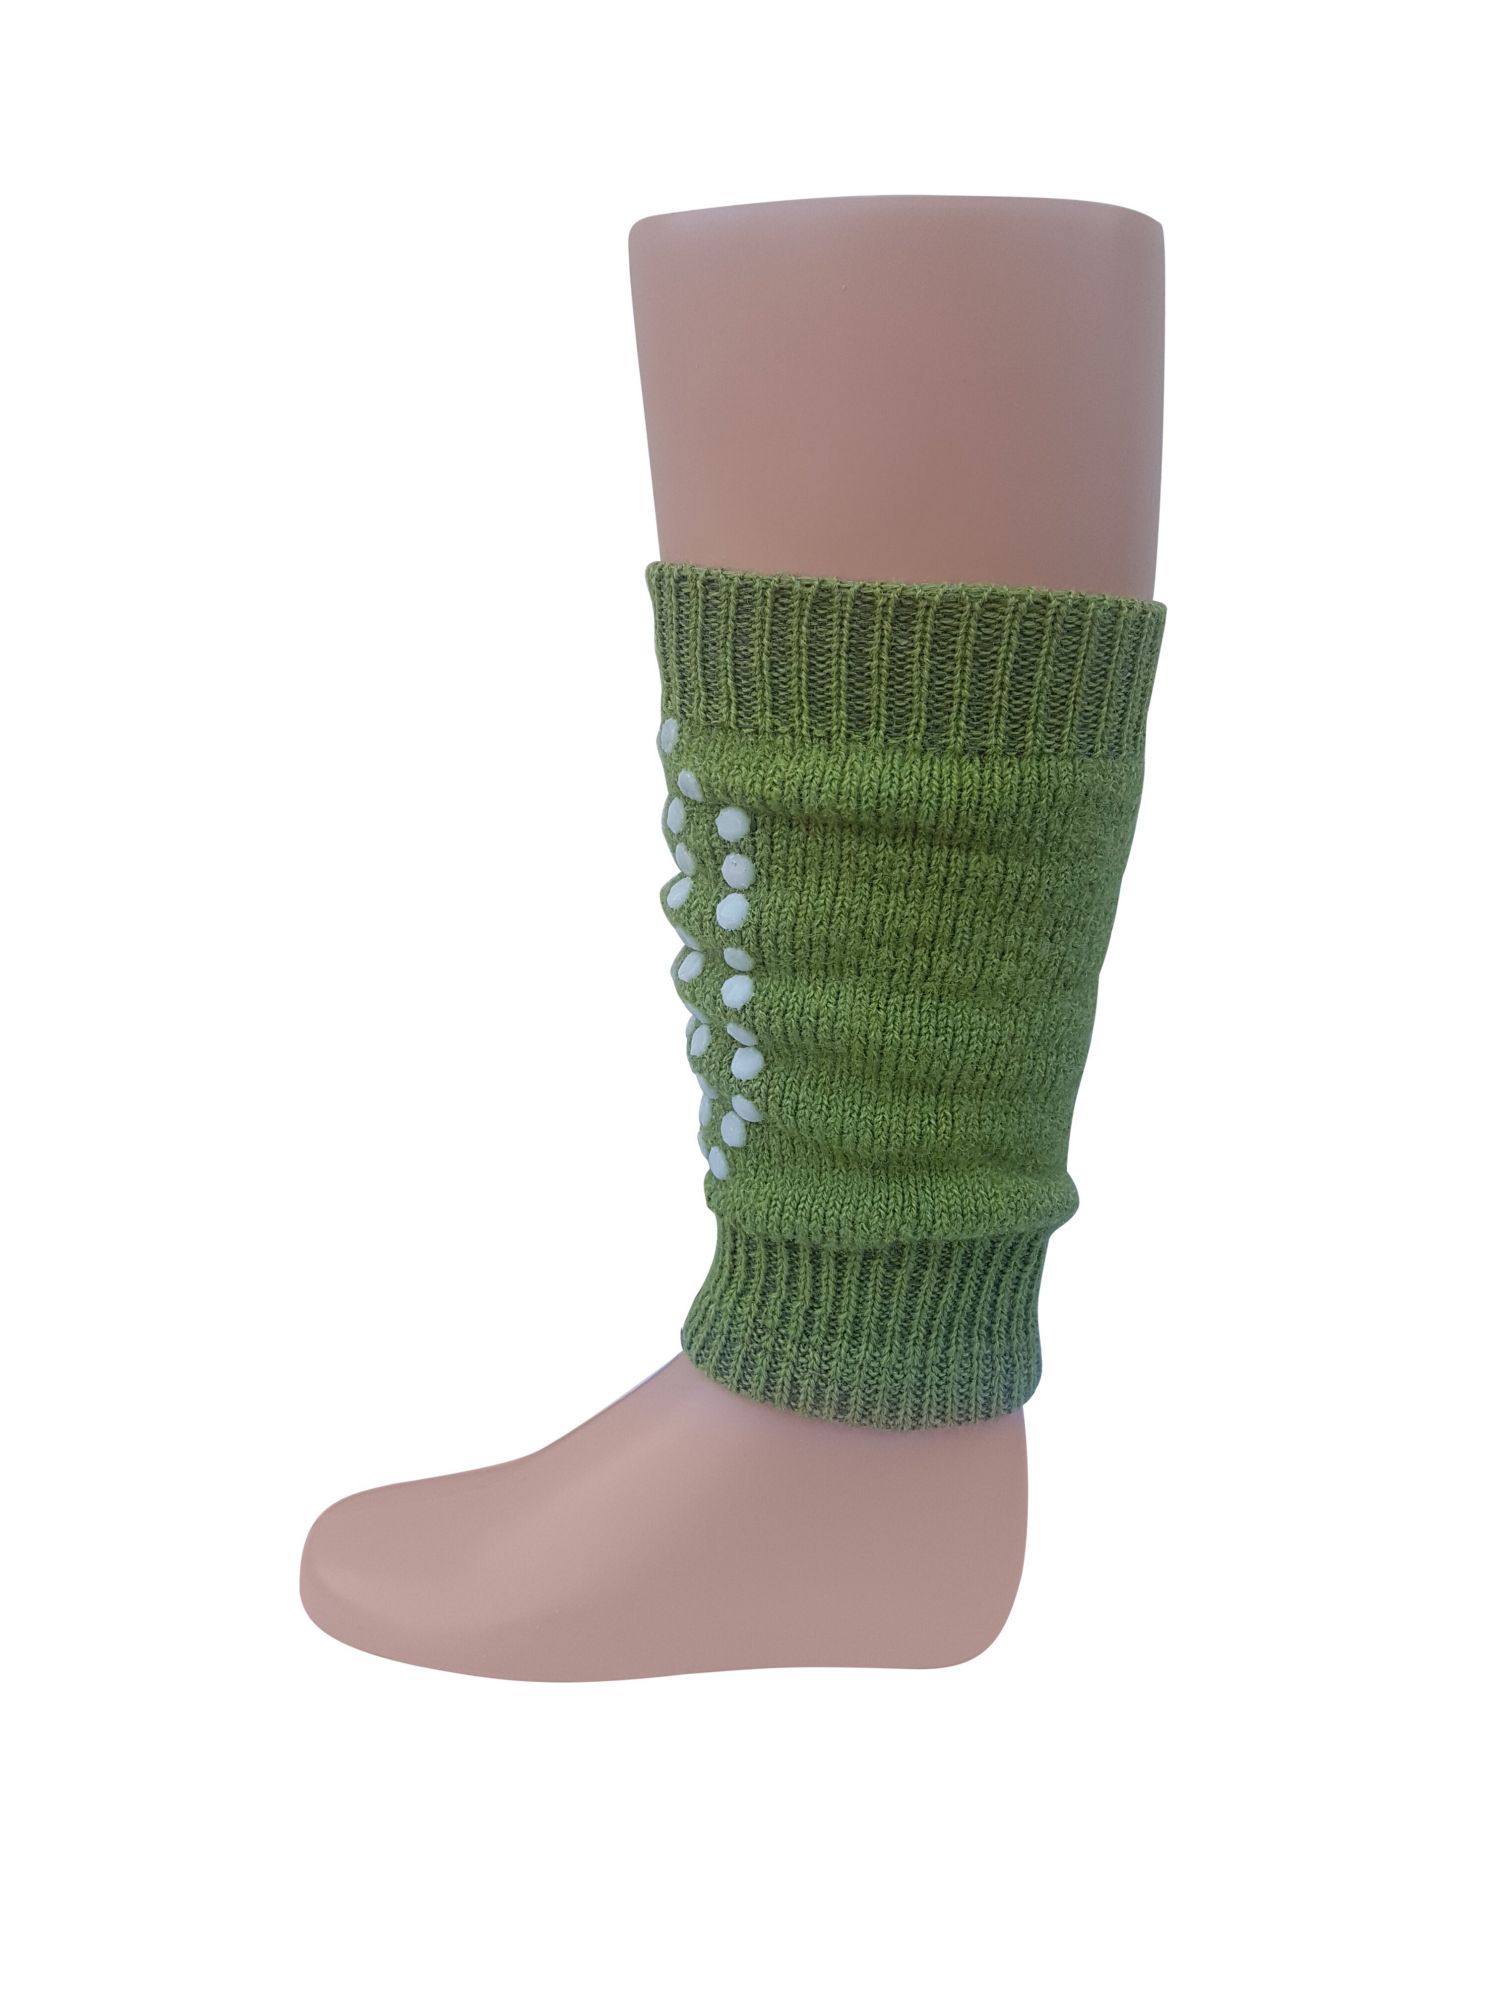 Hirsch Wool Leg Warmers with Silicon Stoppers